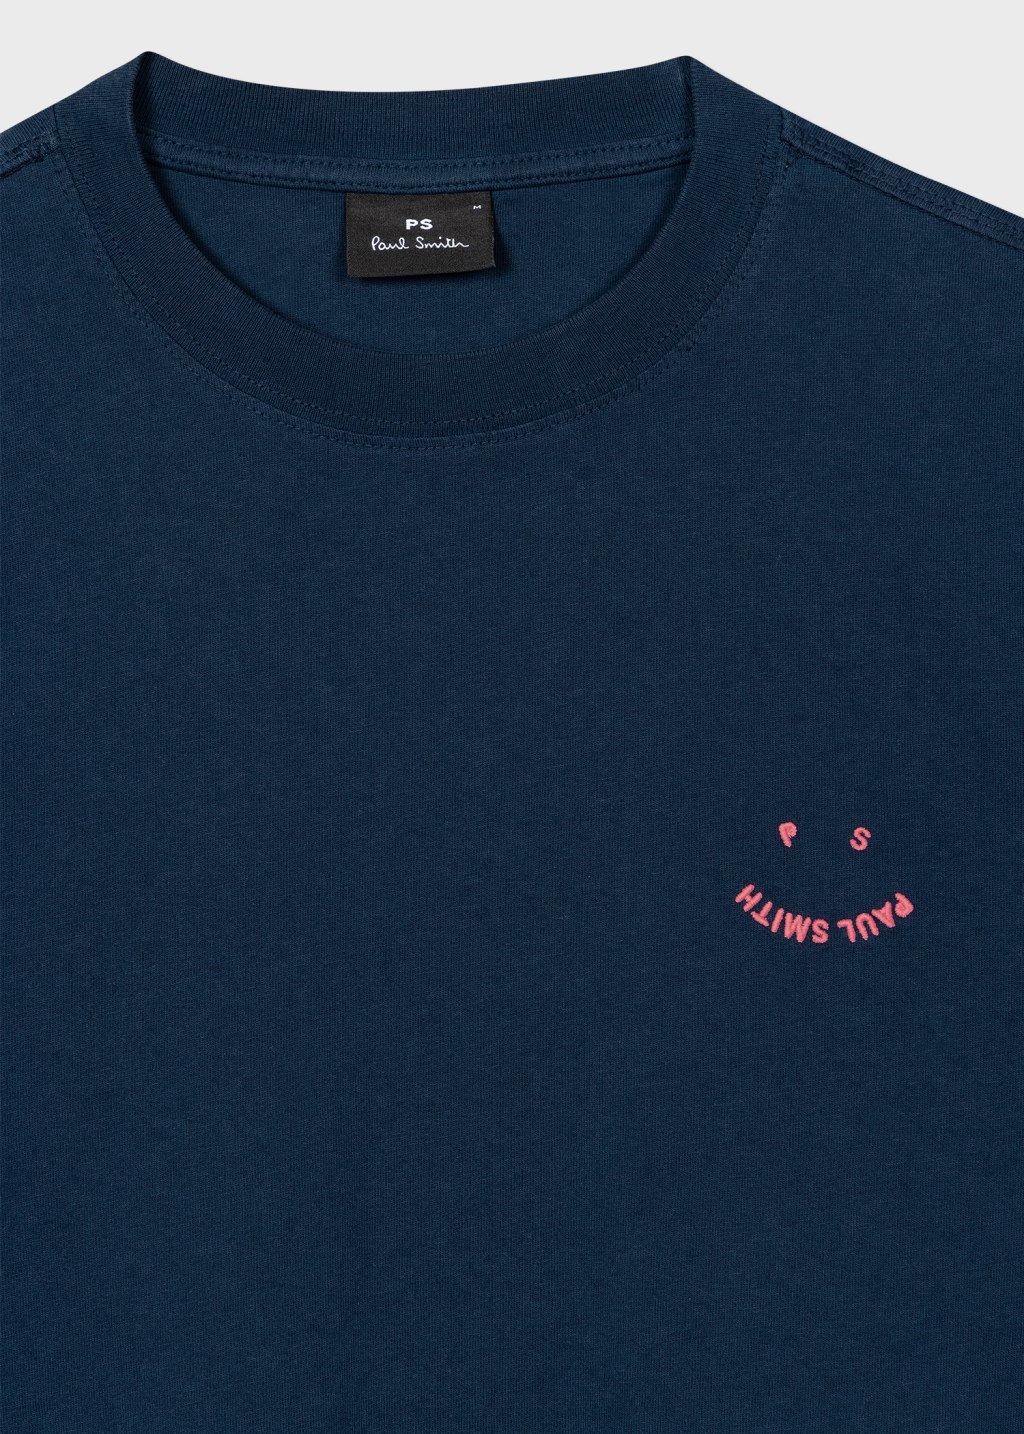 Detail View - Navy Cotton 'Happy' T-Shirt Paul Smith